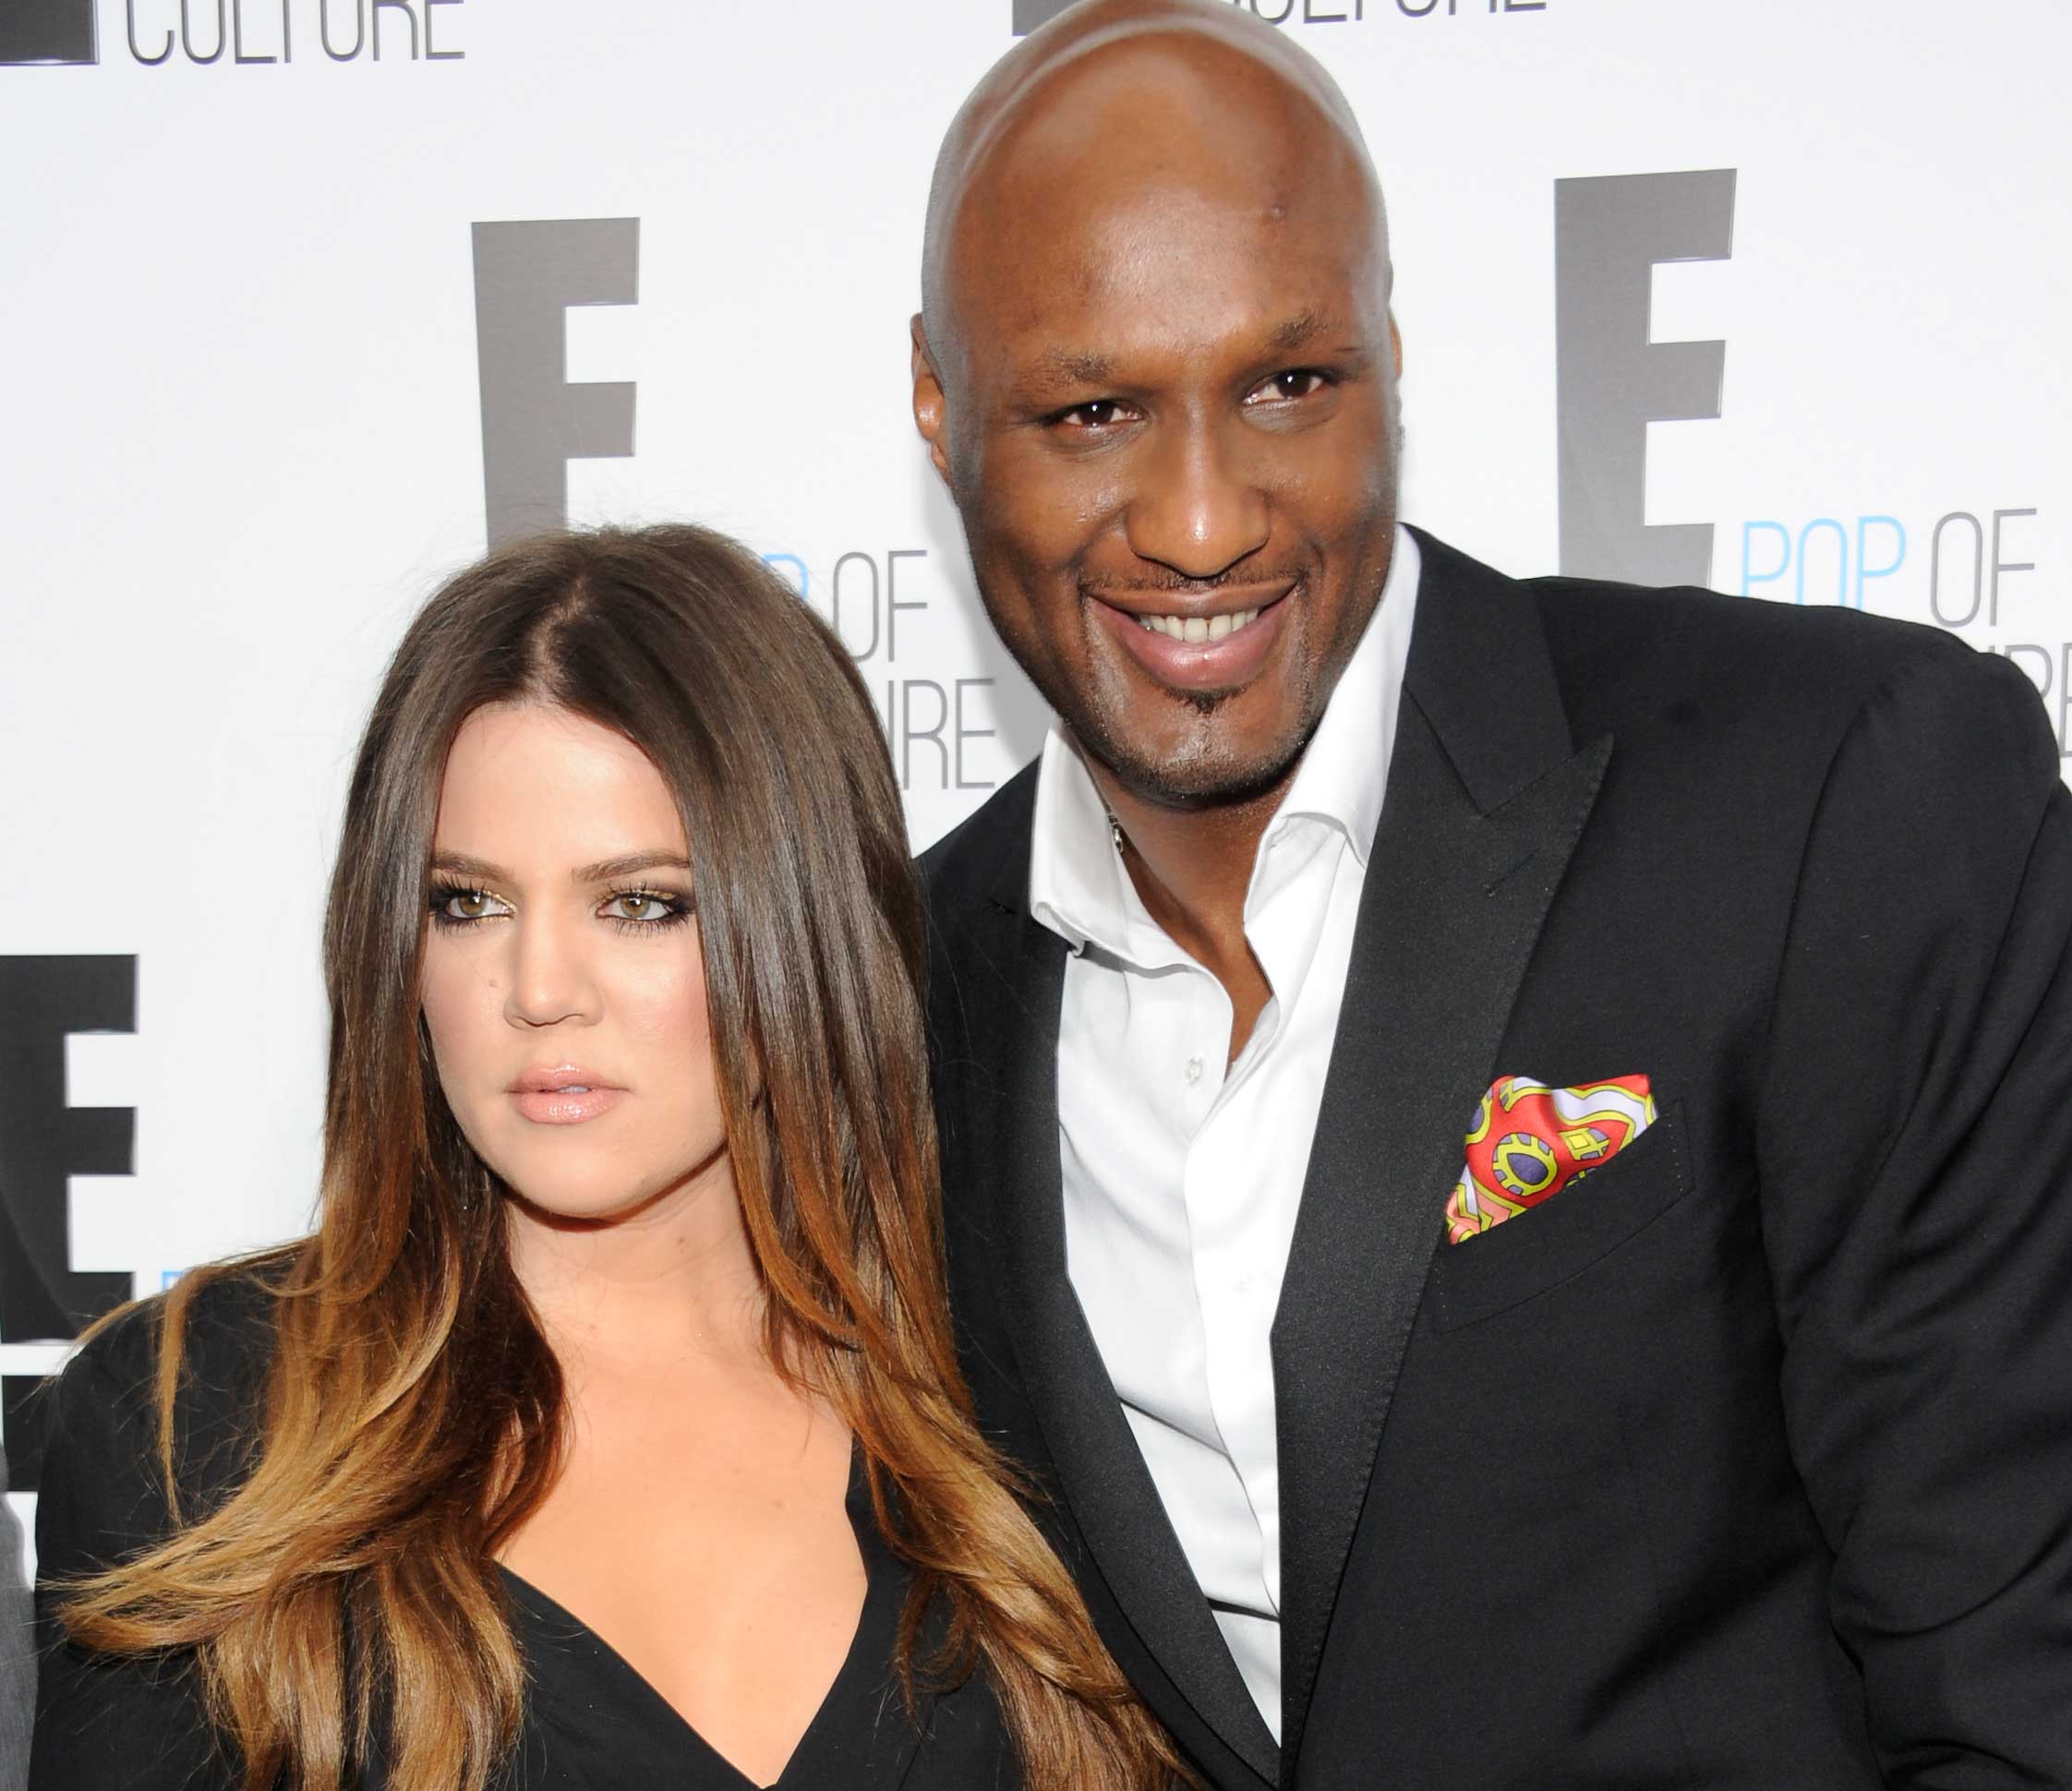 Khloe Kardashian Odom and Lamar Odom from the show "Keeping Up With The Kardashians" attend an E! Network upfront event at Gotham Hall in New York City, April 30, 2012. (Evan Agostini—AP)